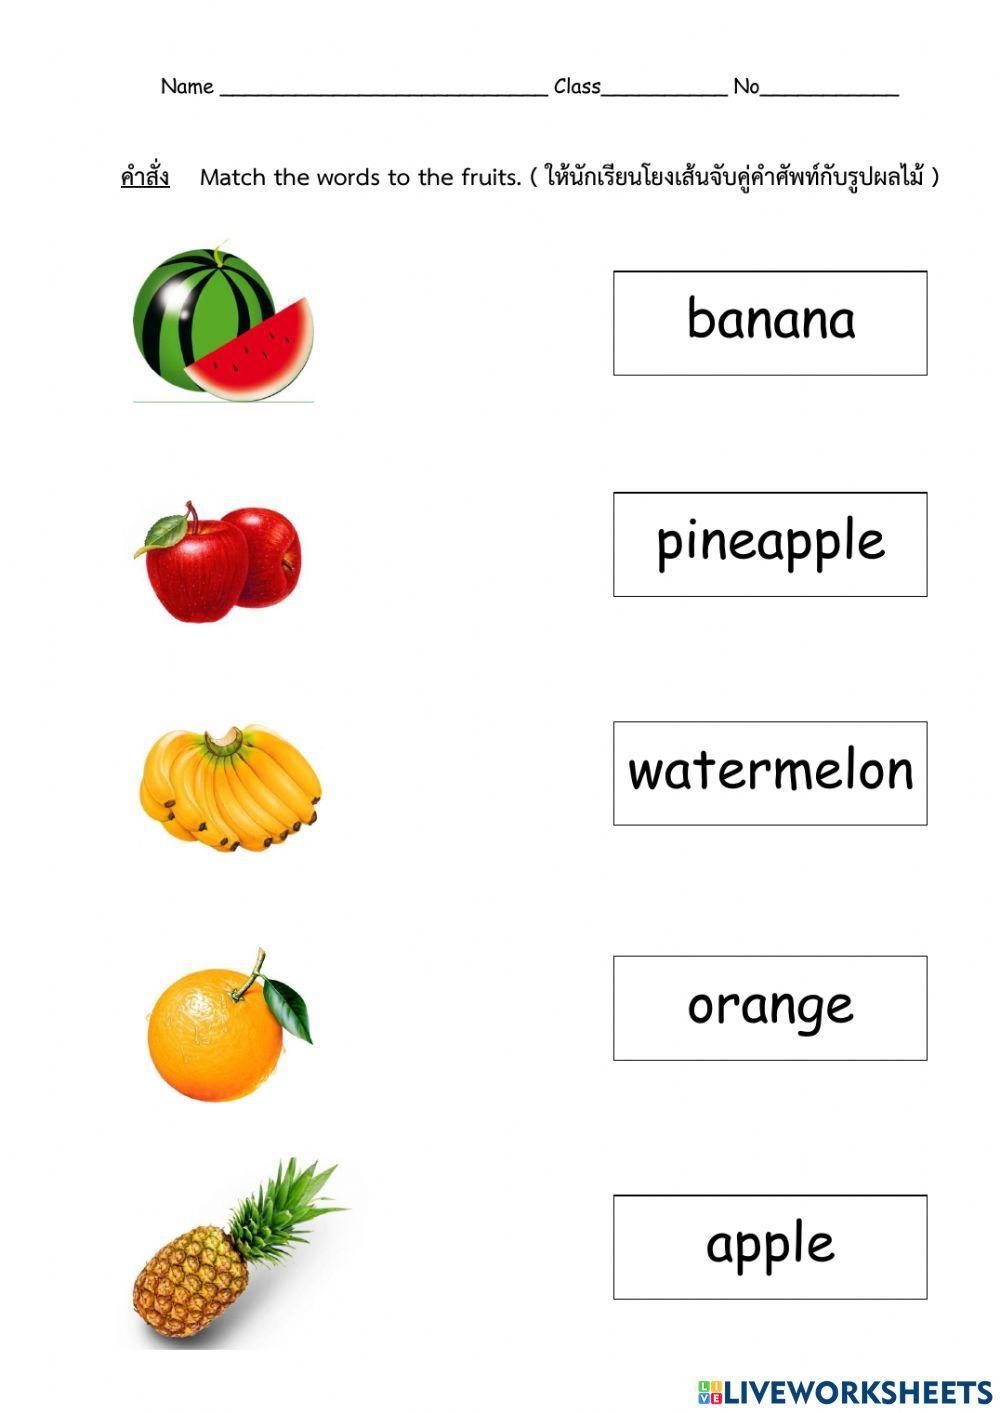 match the fruits